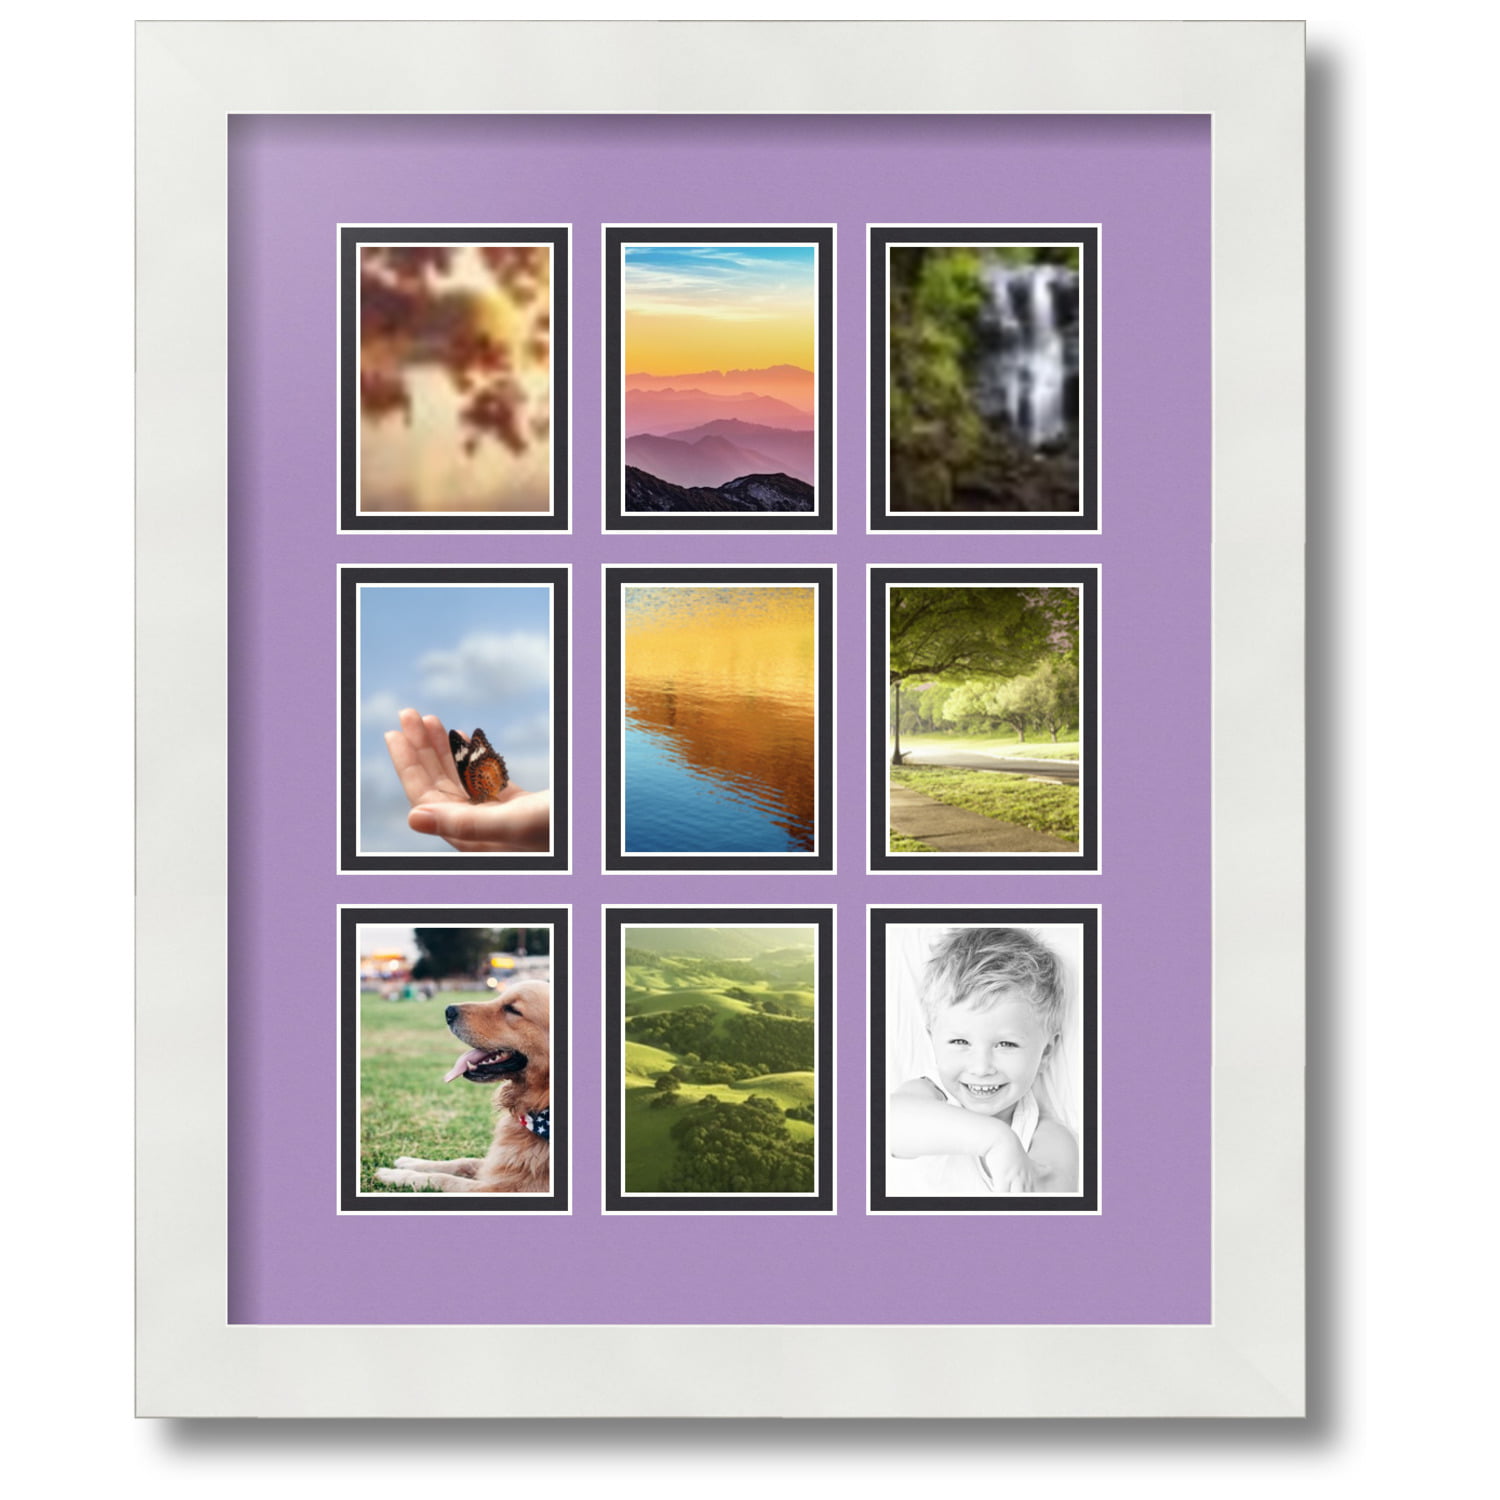 Kelder Victor Redding ArtToFrames Collage Photo Picture Frame with 9 - 2.5x3.5" Openings, Framed  in White with Lavender Mist and Black Mats (CDM-3966-213) - Walmart.com